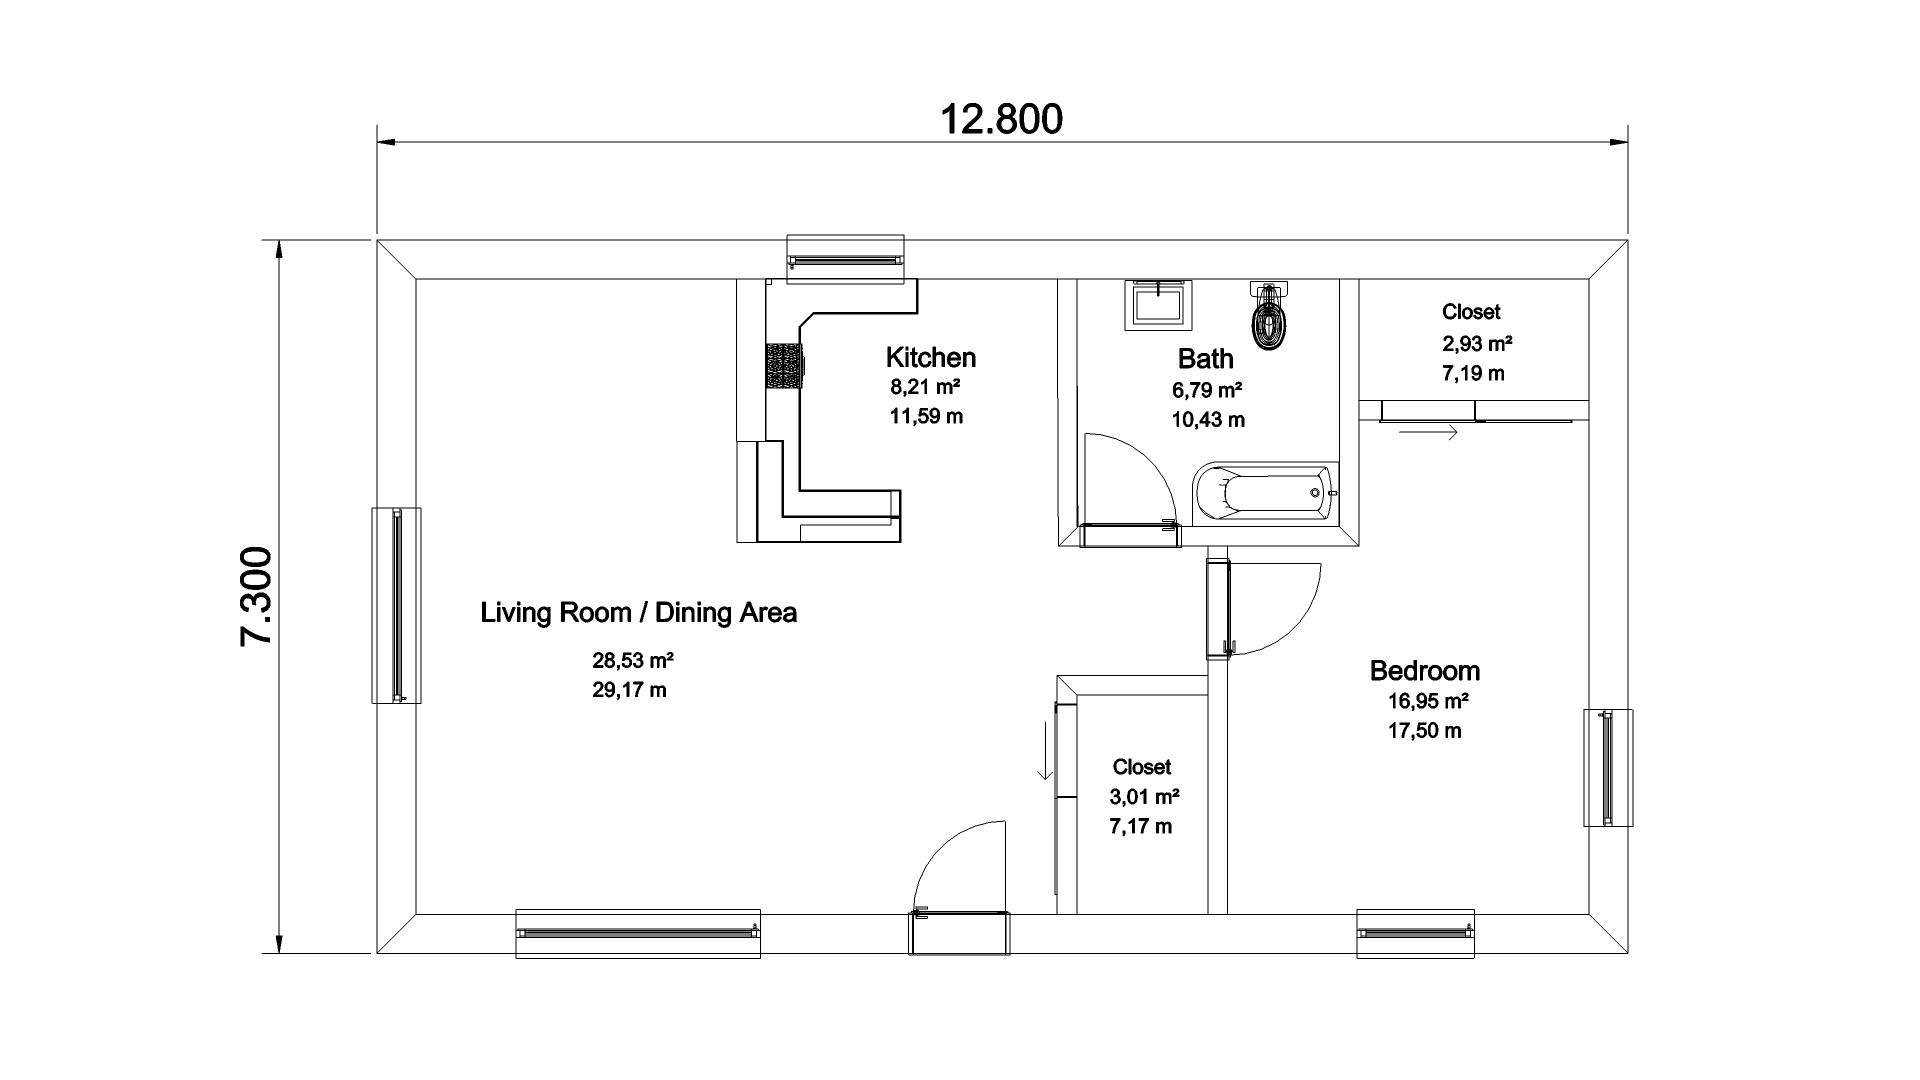 Creating Floor Plans for Real Estate Listings pCon blog